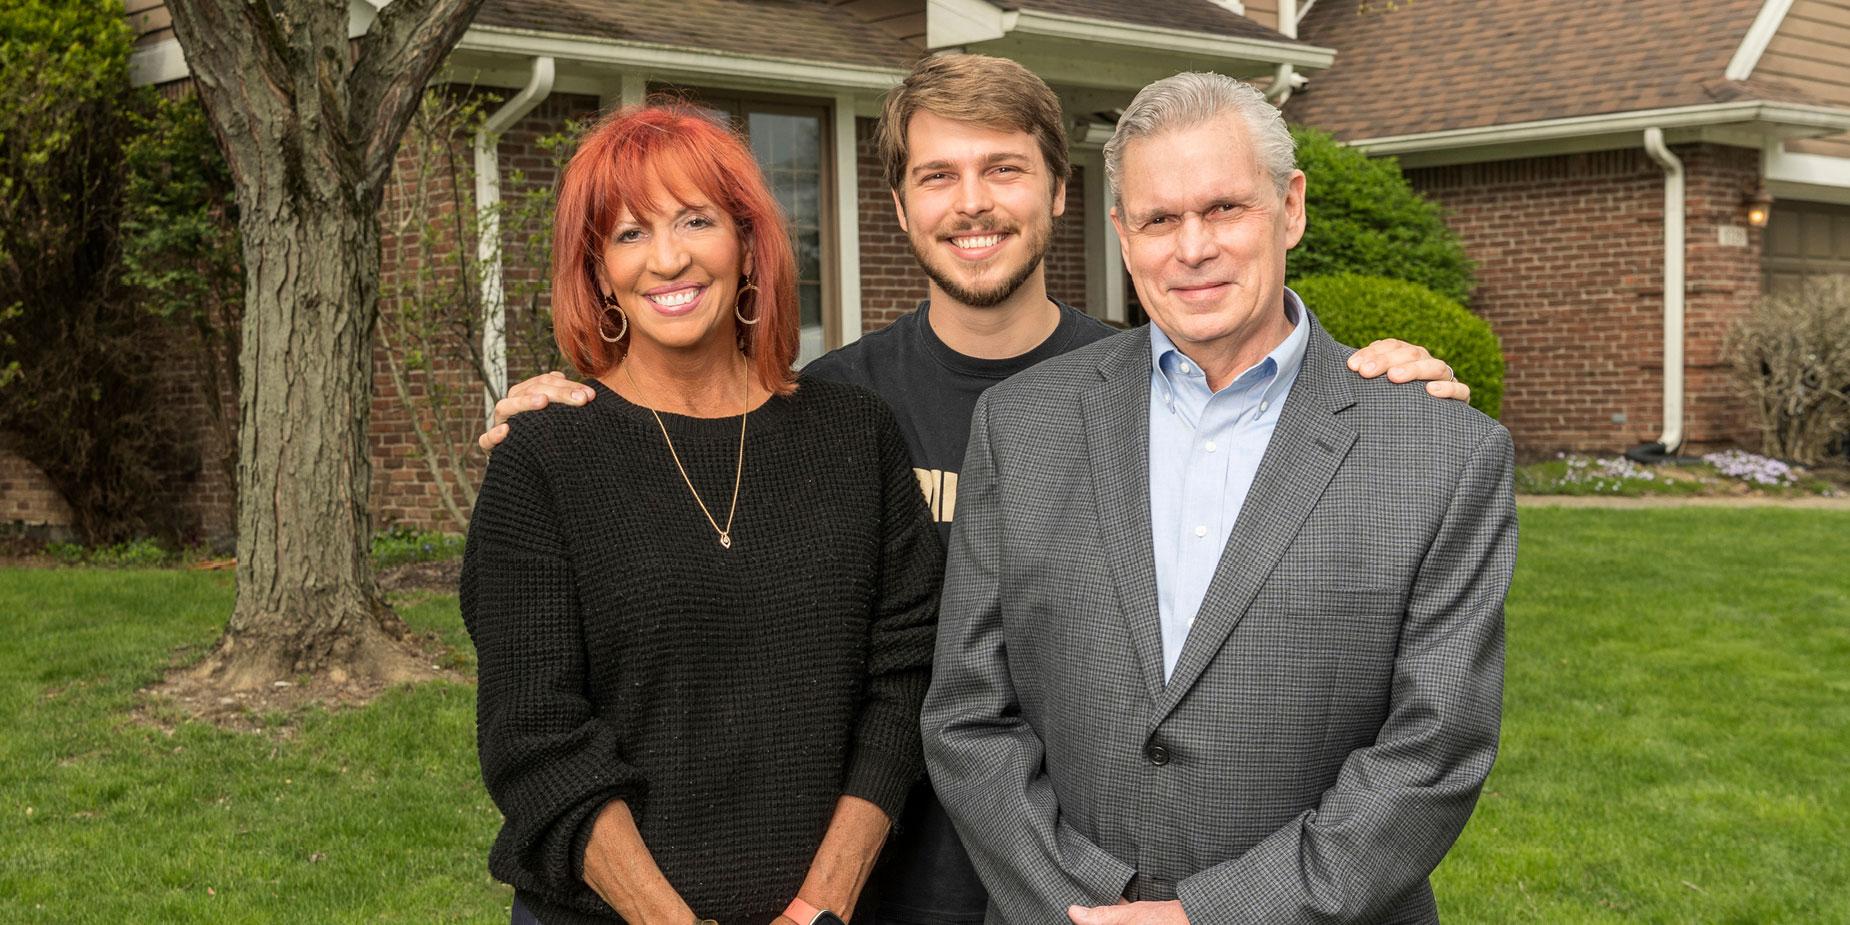 Linda, Logan and Keith Noster pose for a photo in front of their home in Indianapolis.